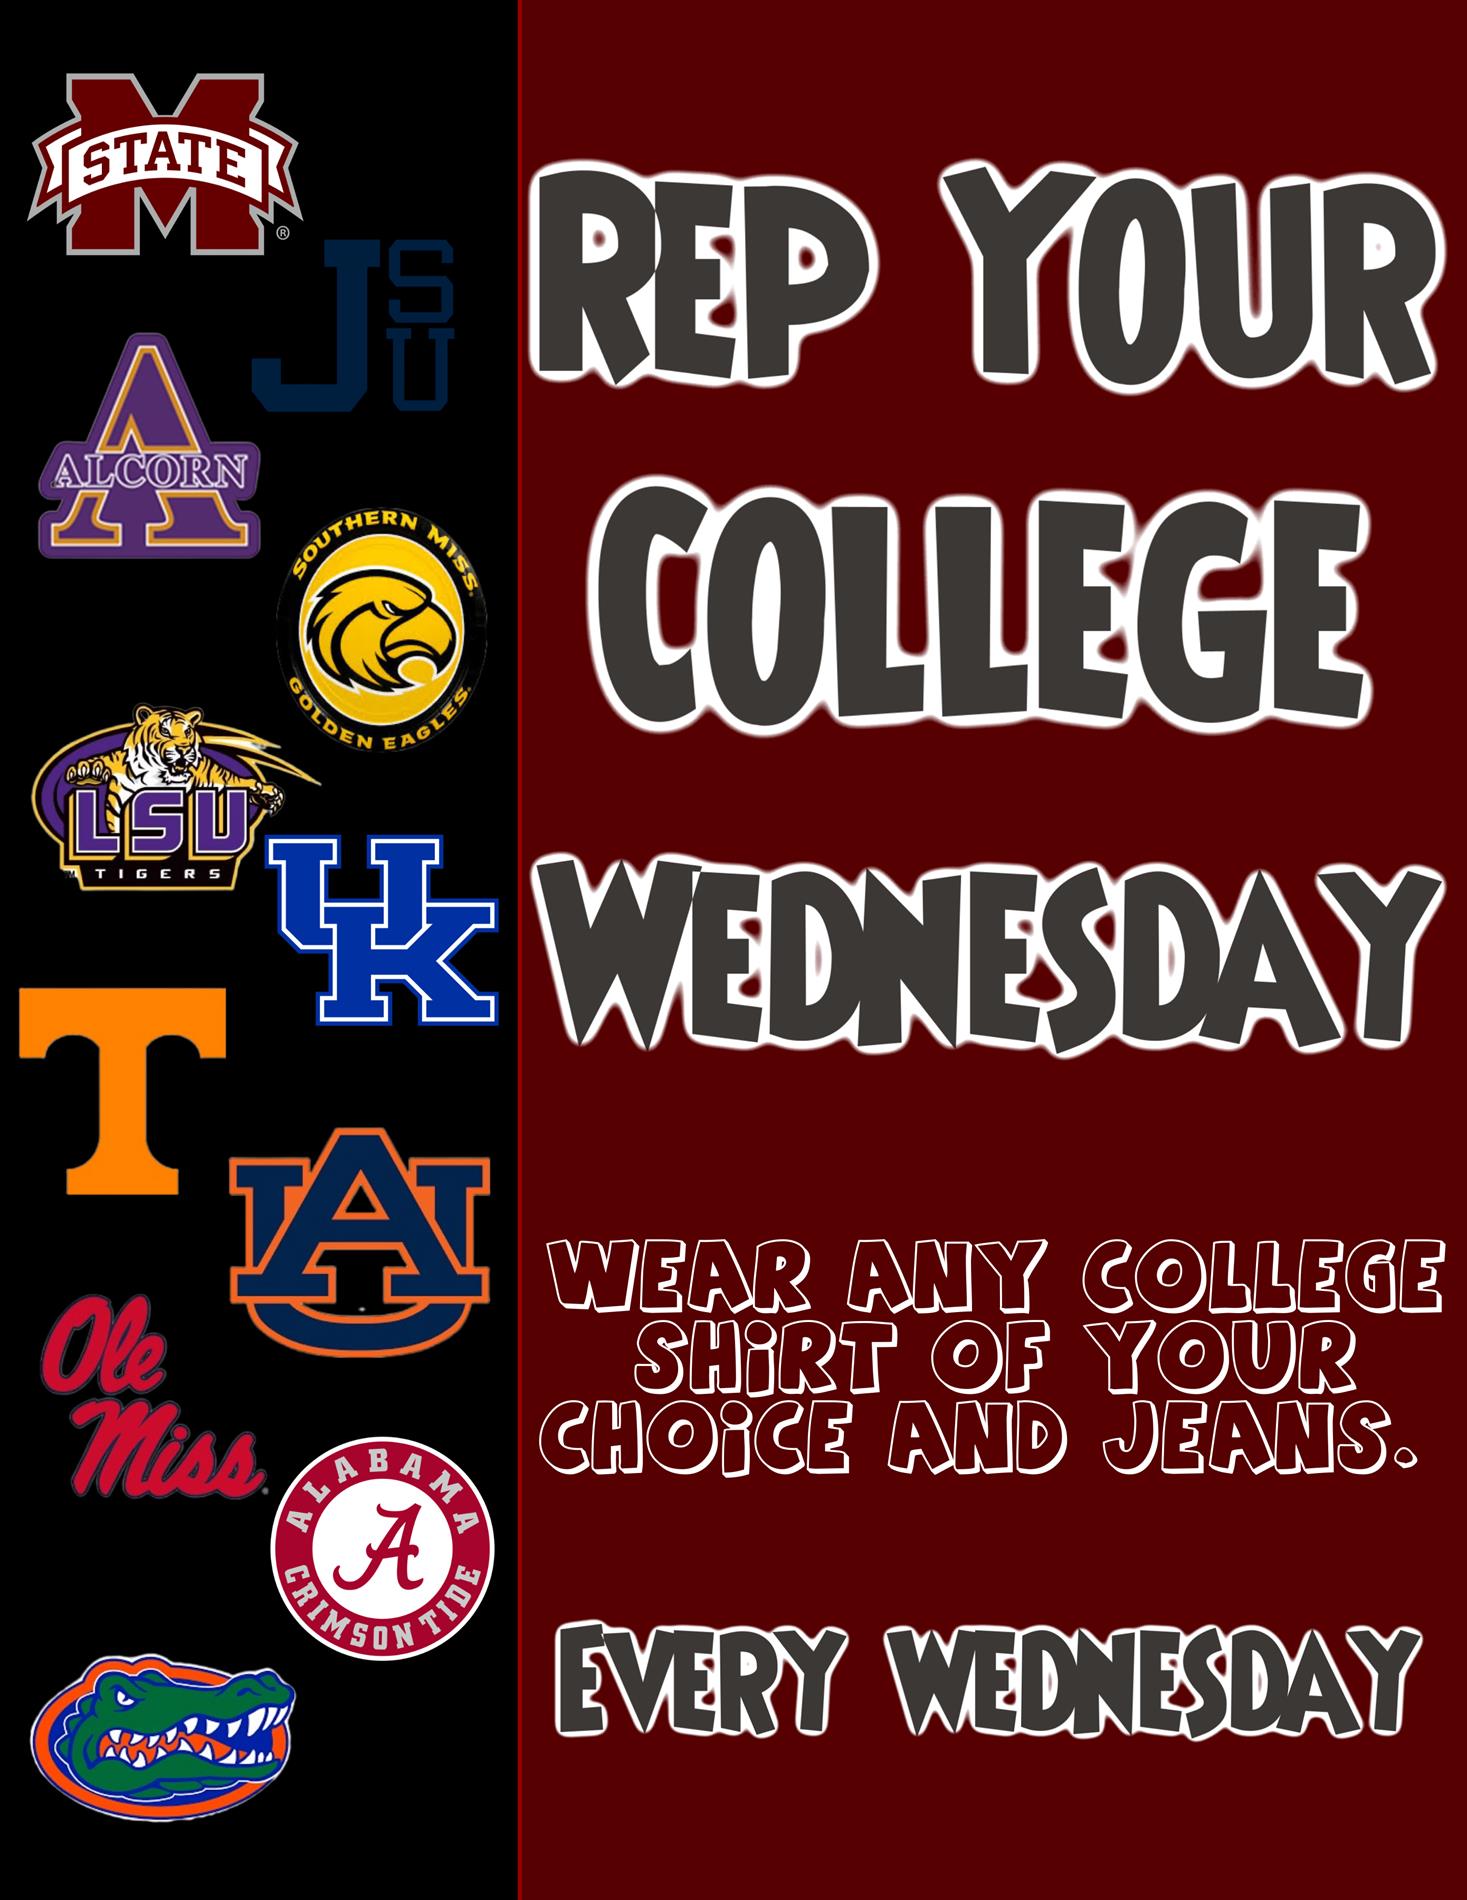 Rep Your College 